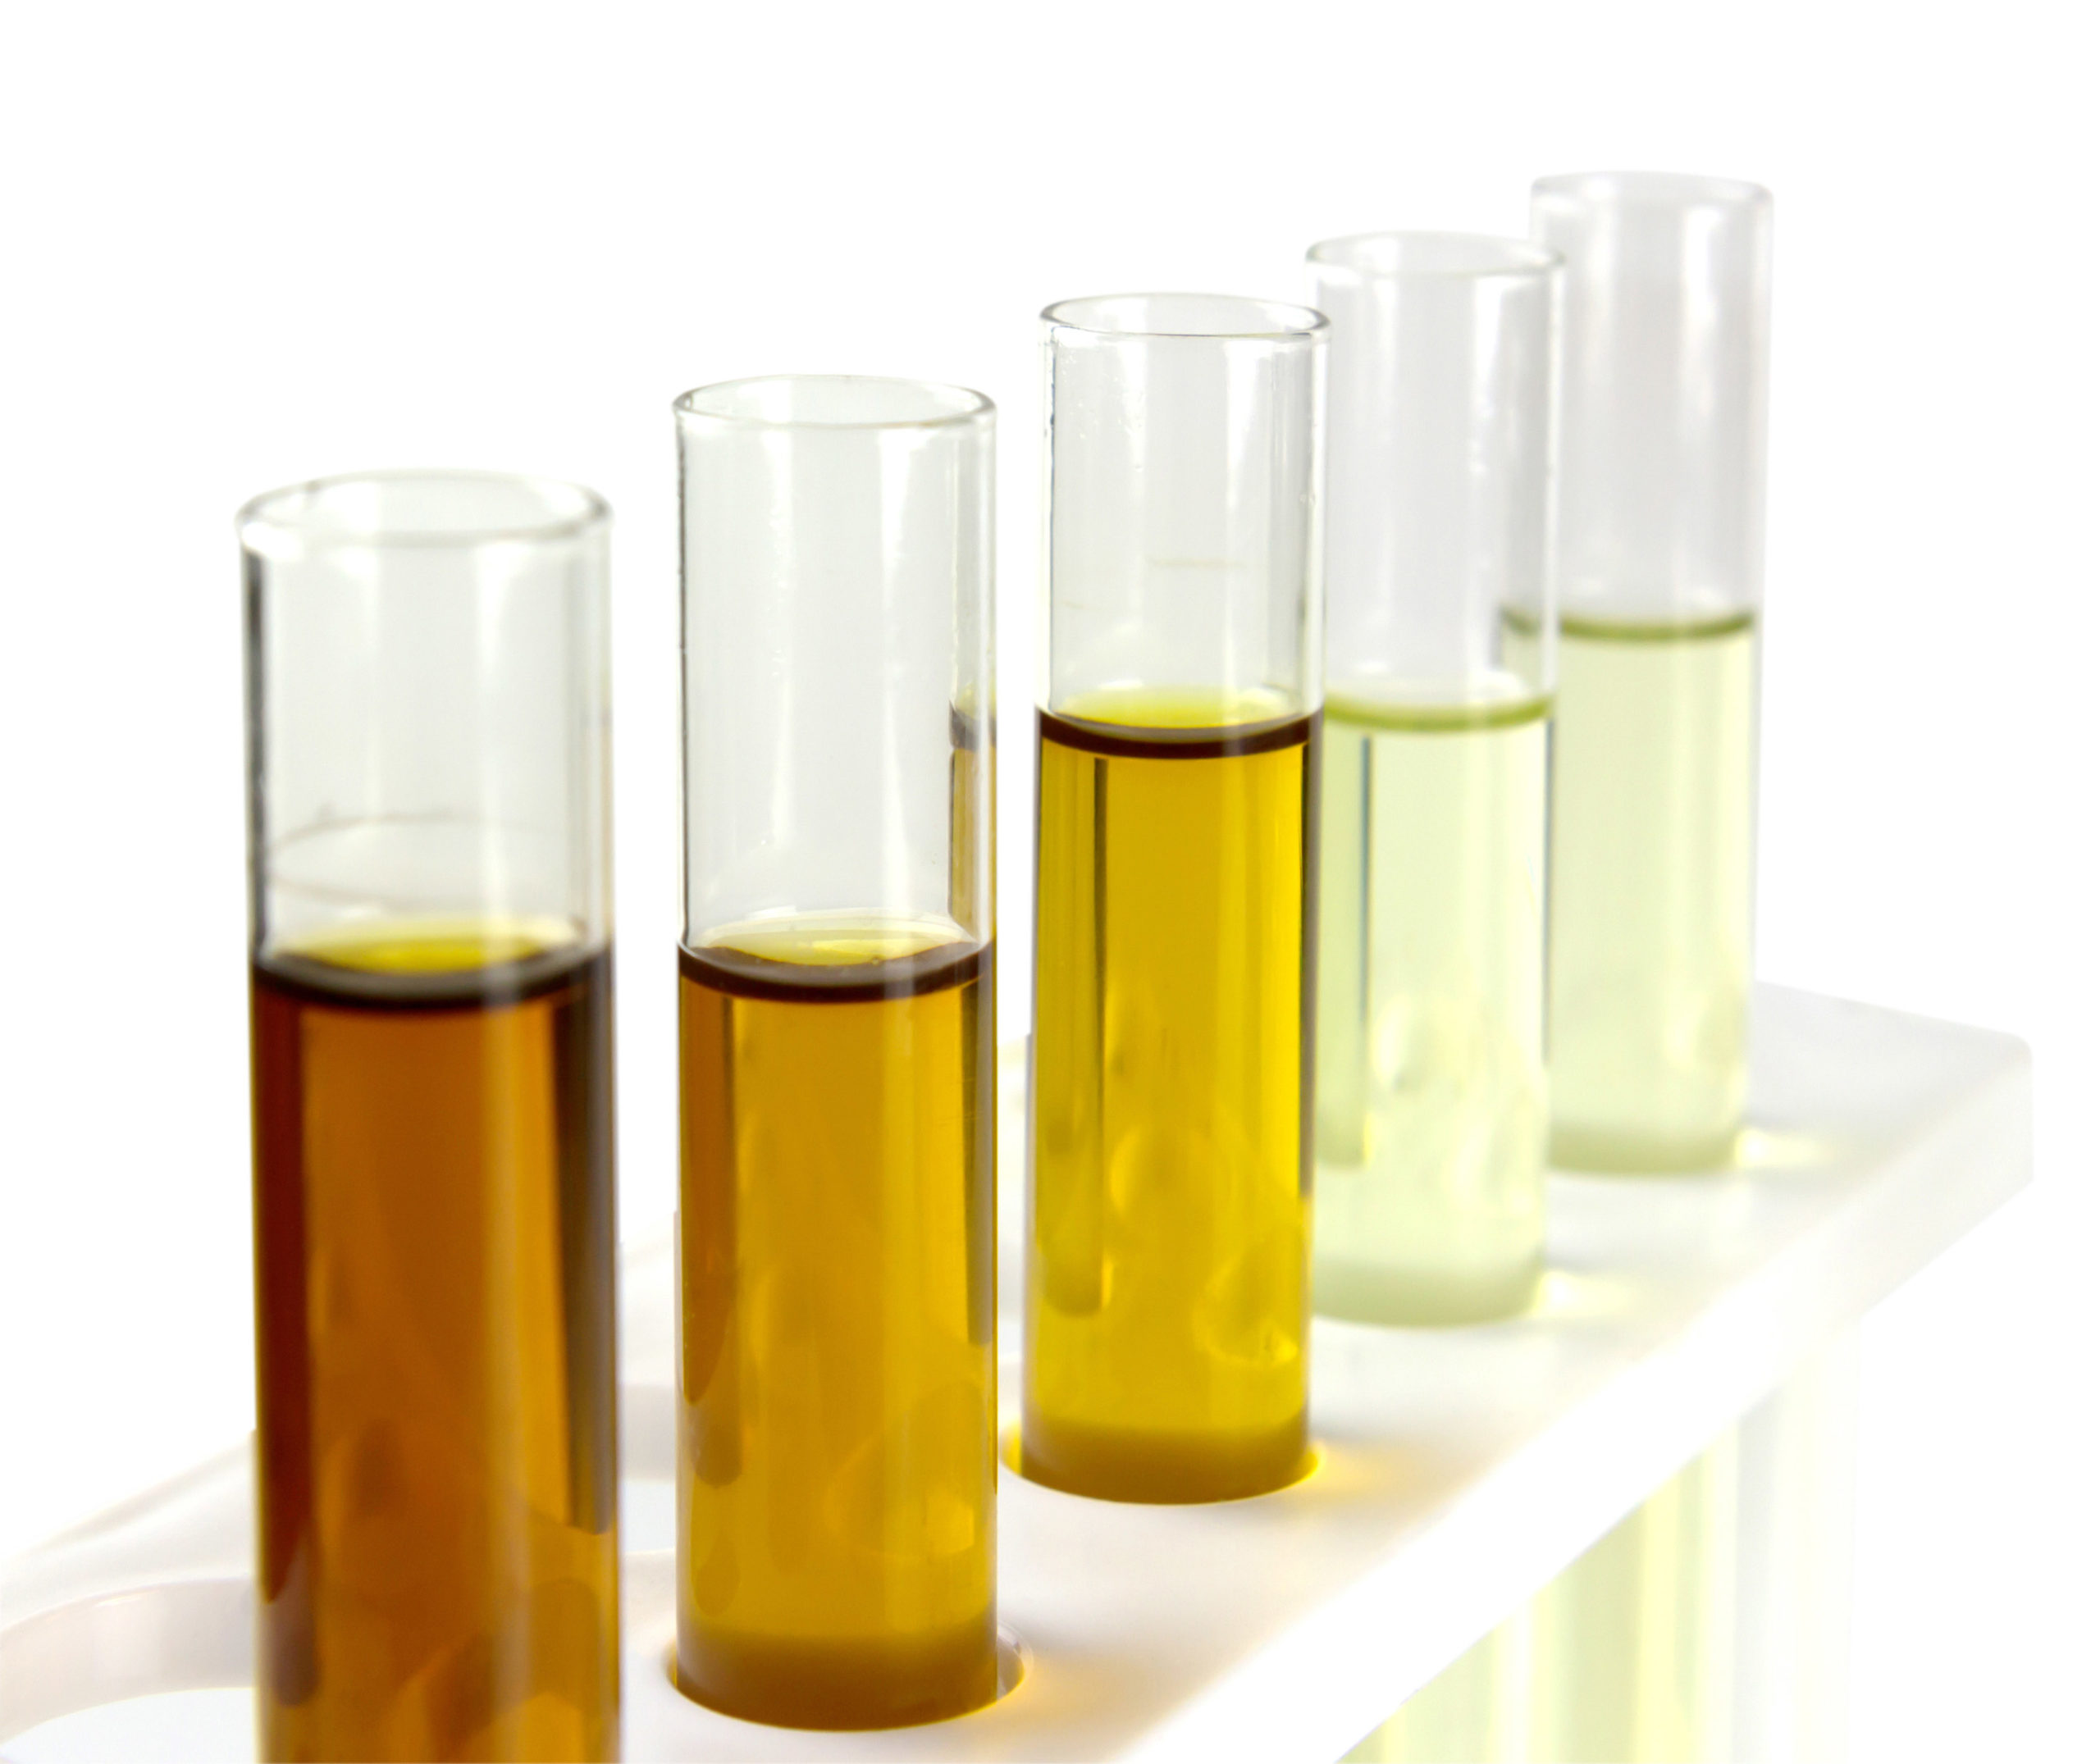 oil in glass tube isolate on white background, hydralic oil testing in industry labratory